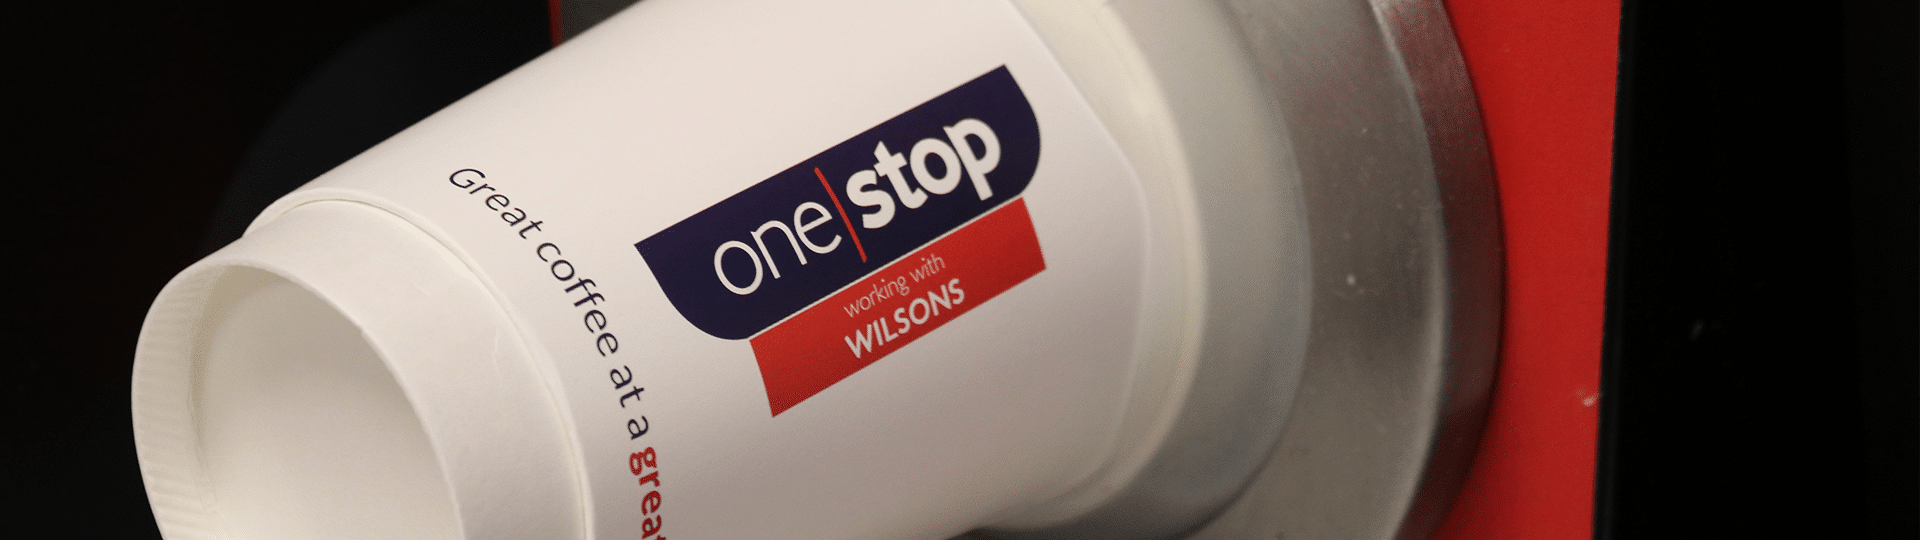 Franchisee Focus: The Wilson Group